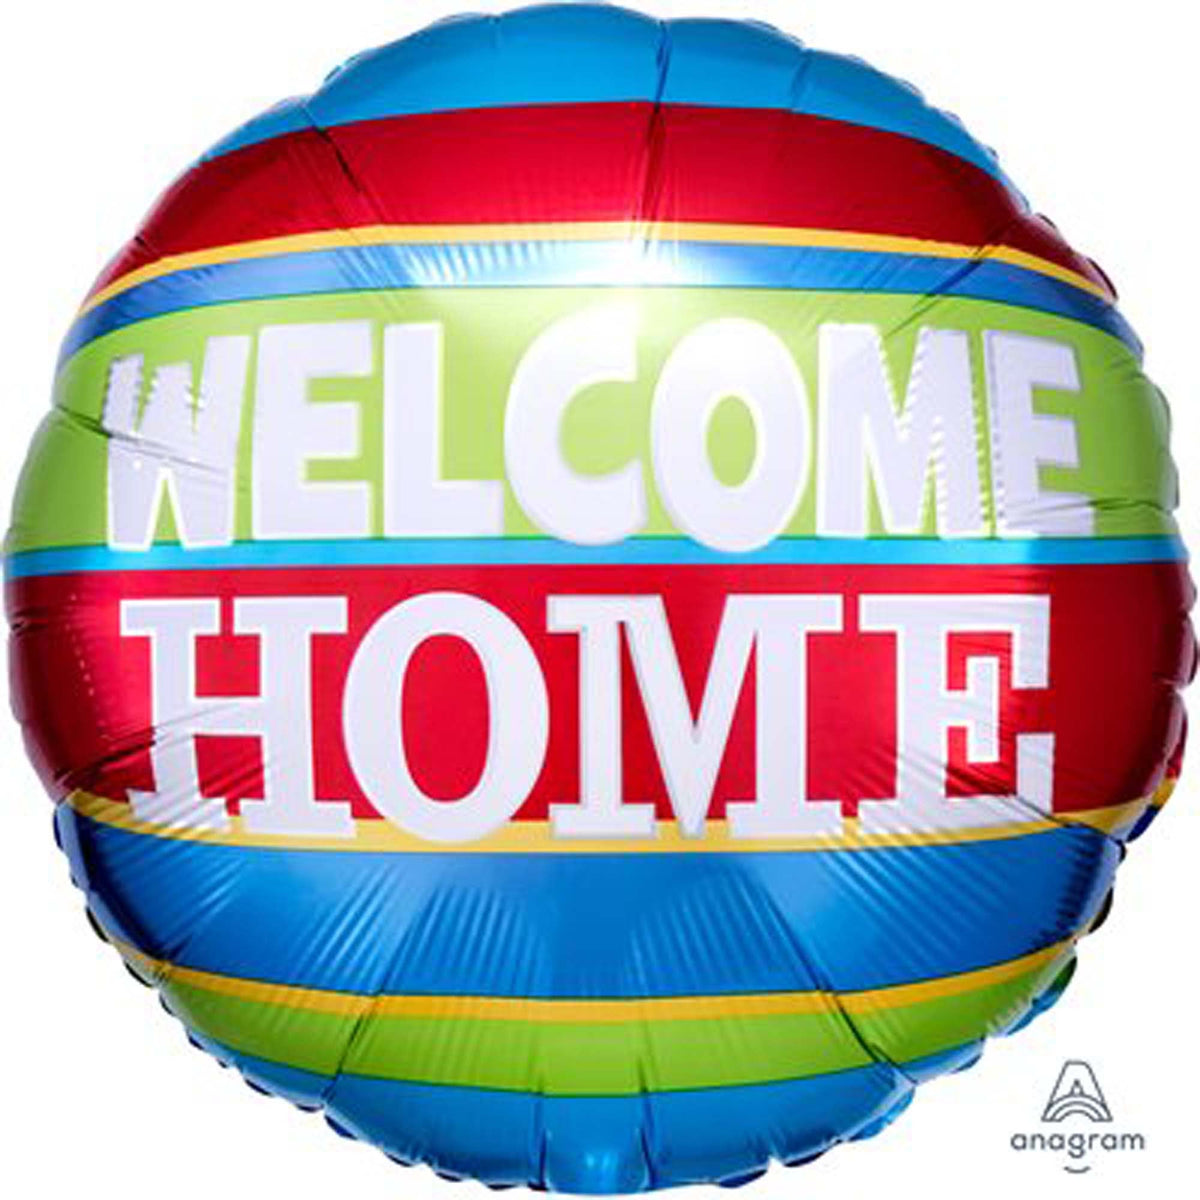 LE GROUPE BLC INTL INC Balloons Welcome Home Round Foil Balloon, Red, Blue, Yellow & Green, 18 Inches, 1 Count 026635345453